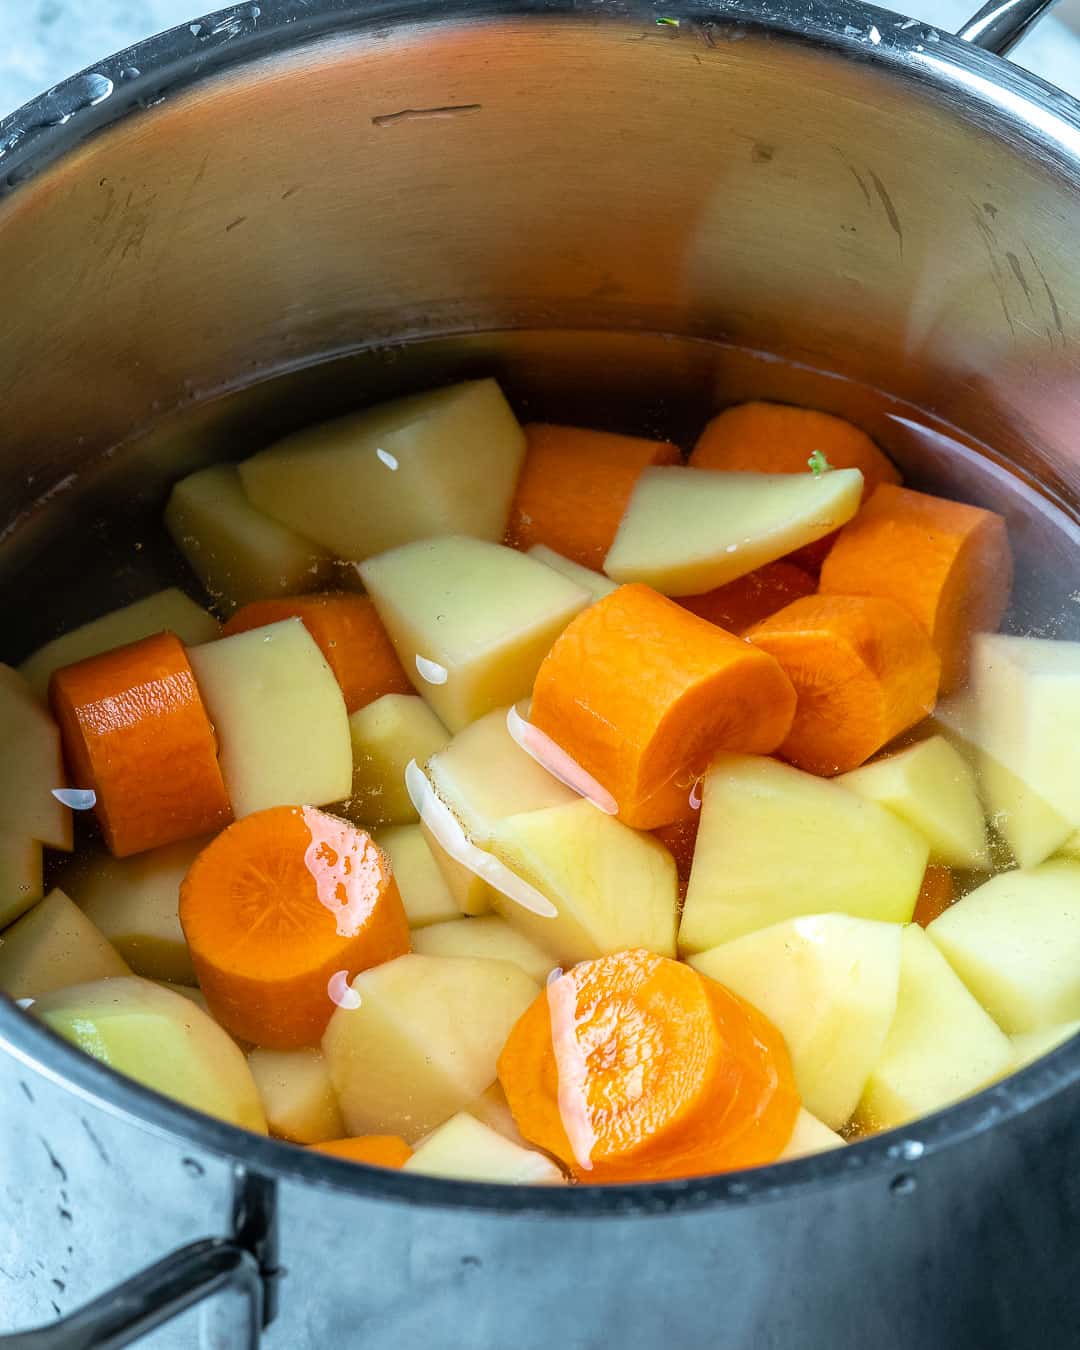 BOILED POTATOES AND CARROTS FOR VEGAN MAC AND CHEESE RECIPE